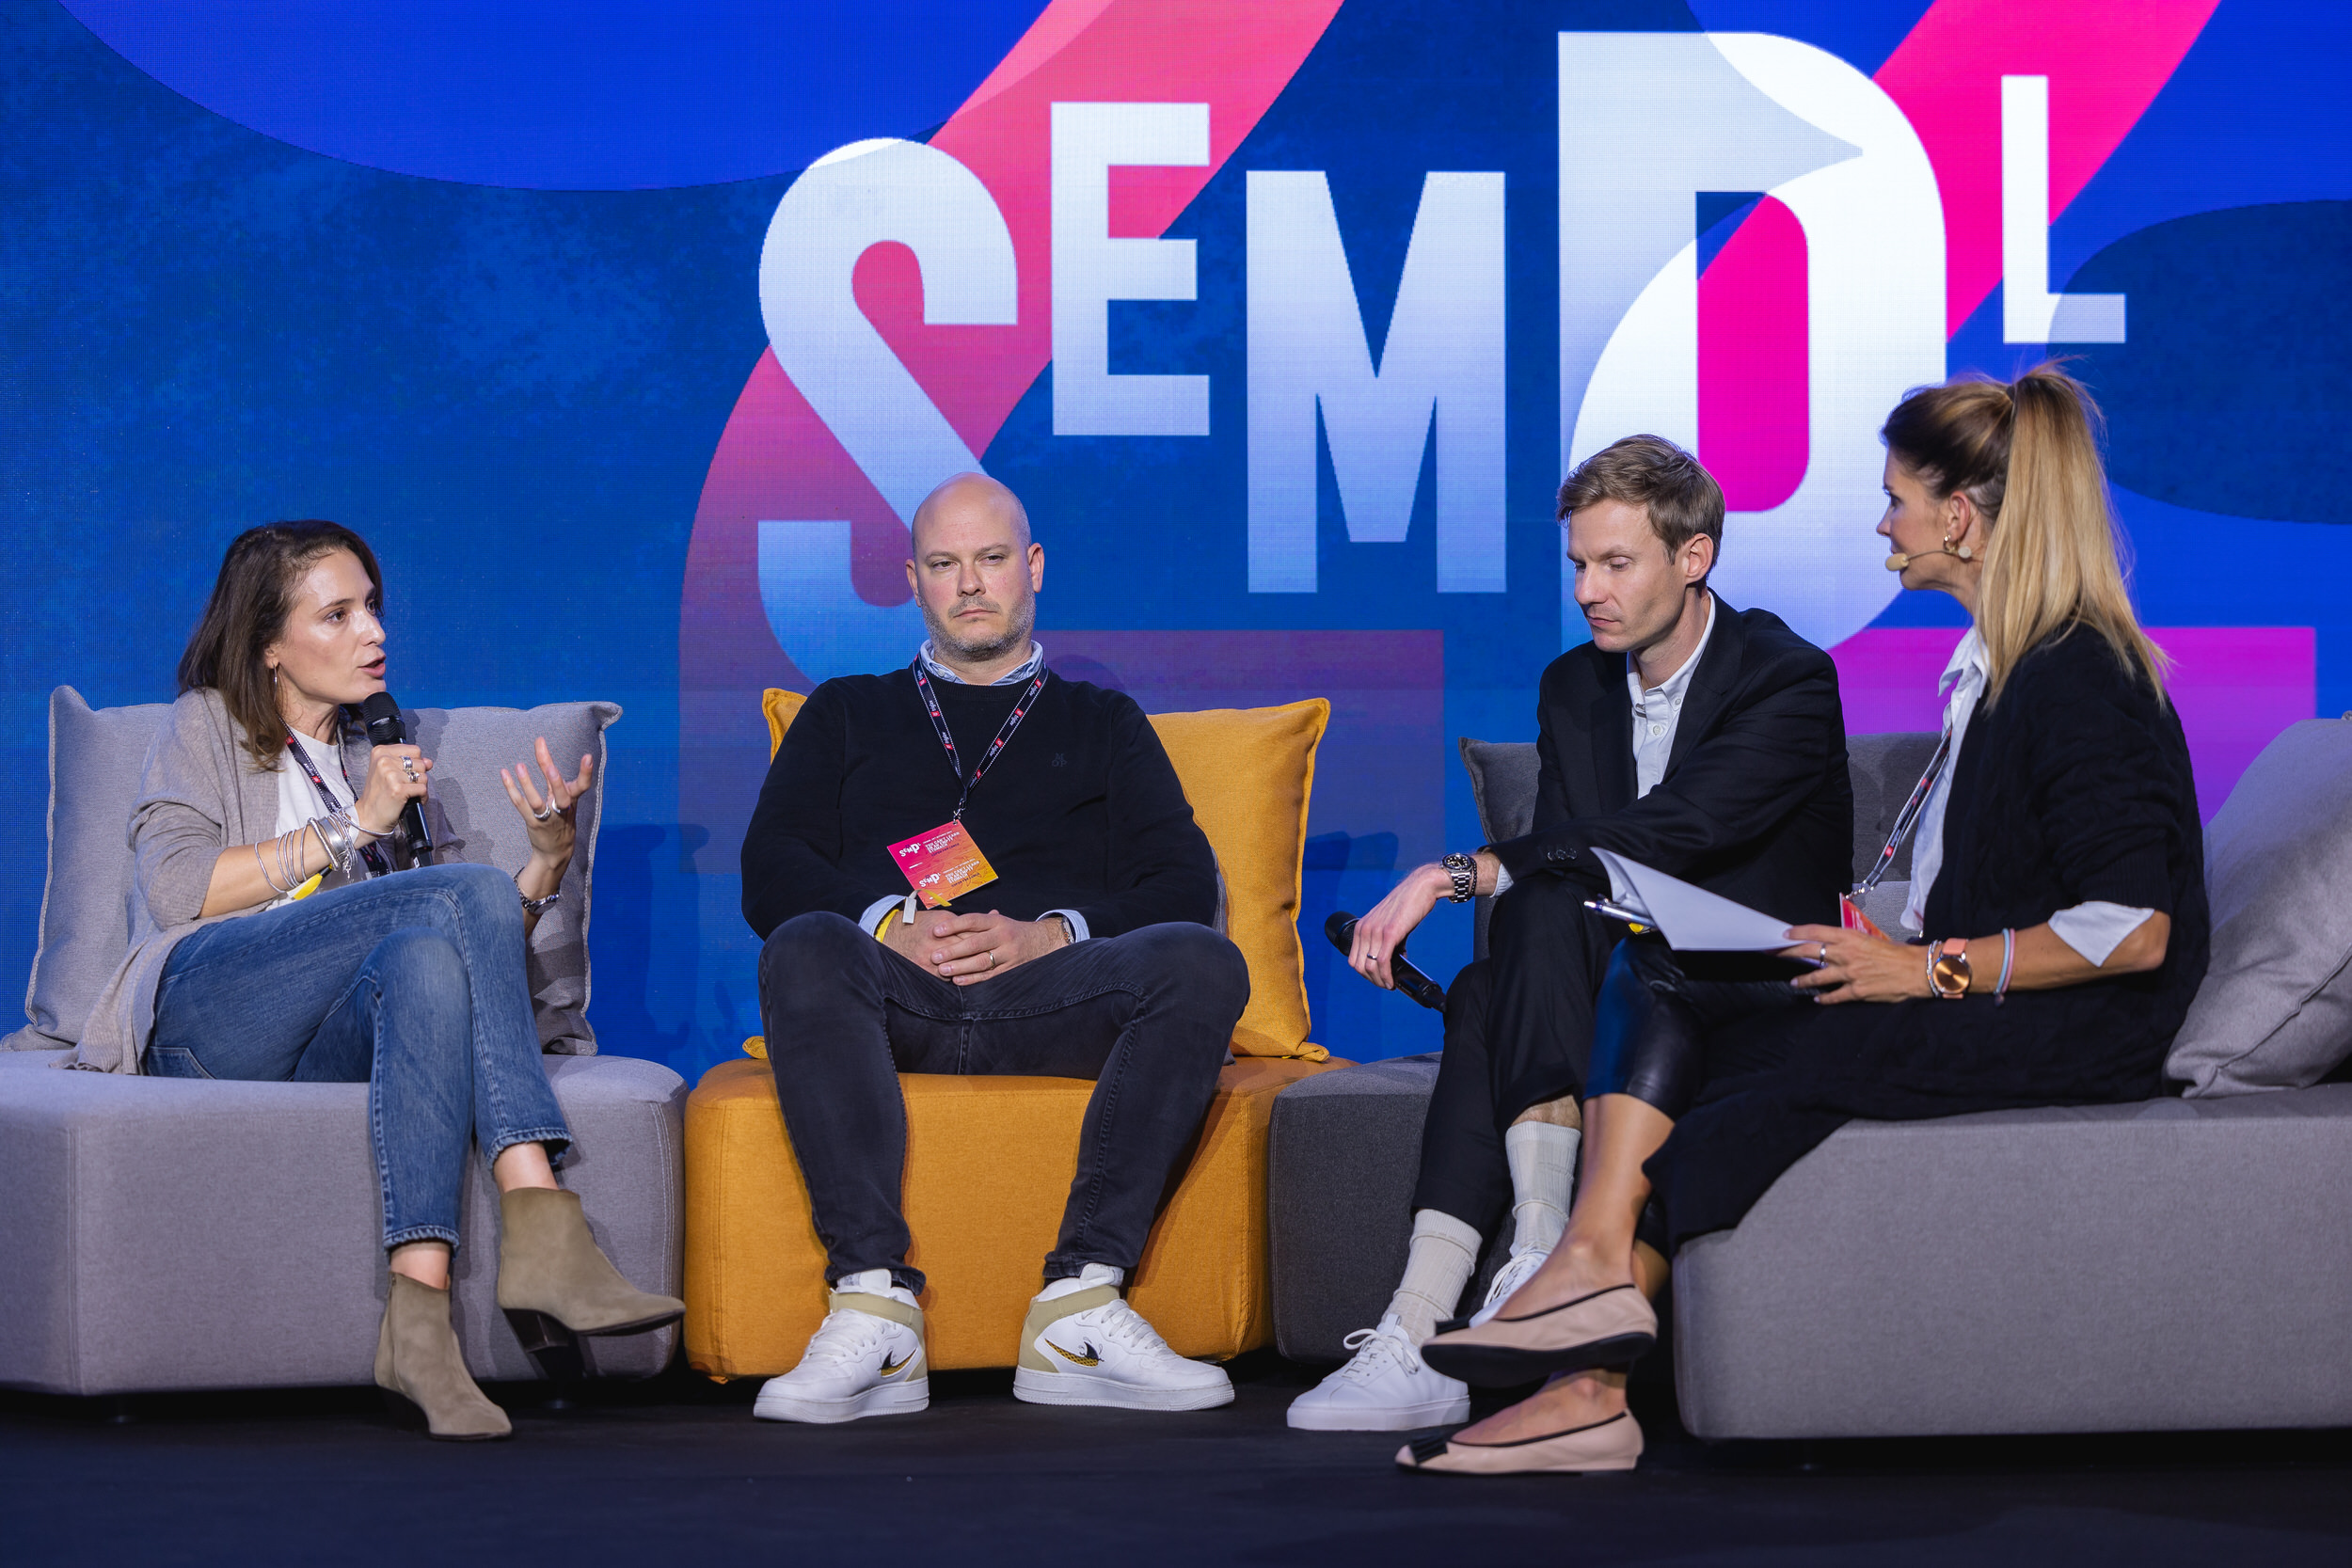 SEMPL: Media trends to have in mind for 2024